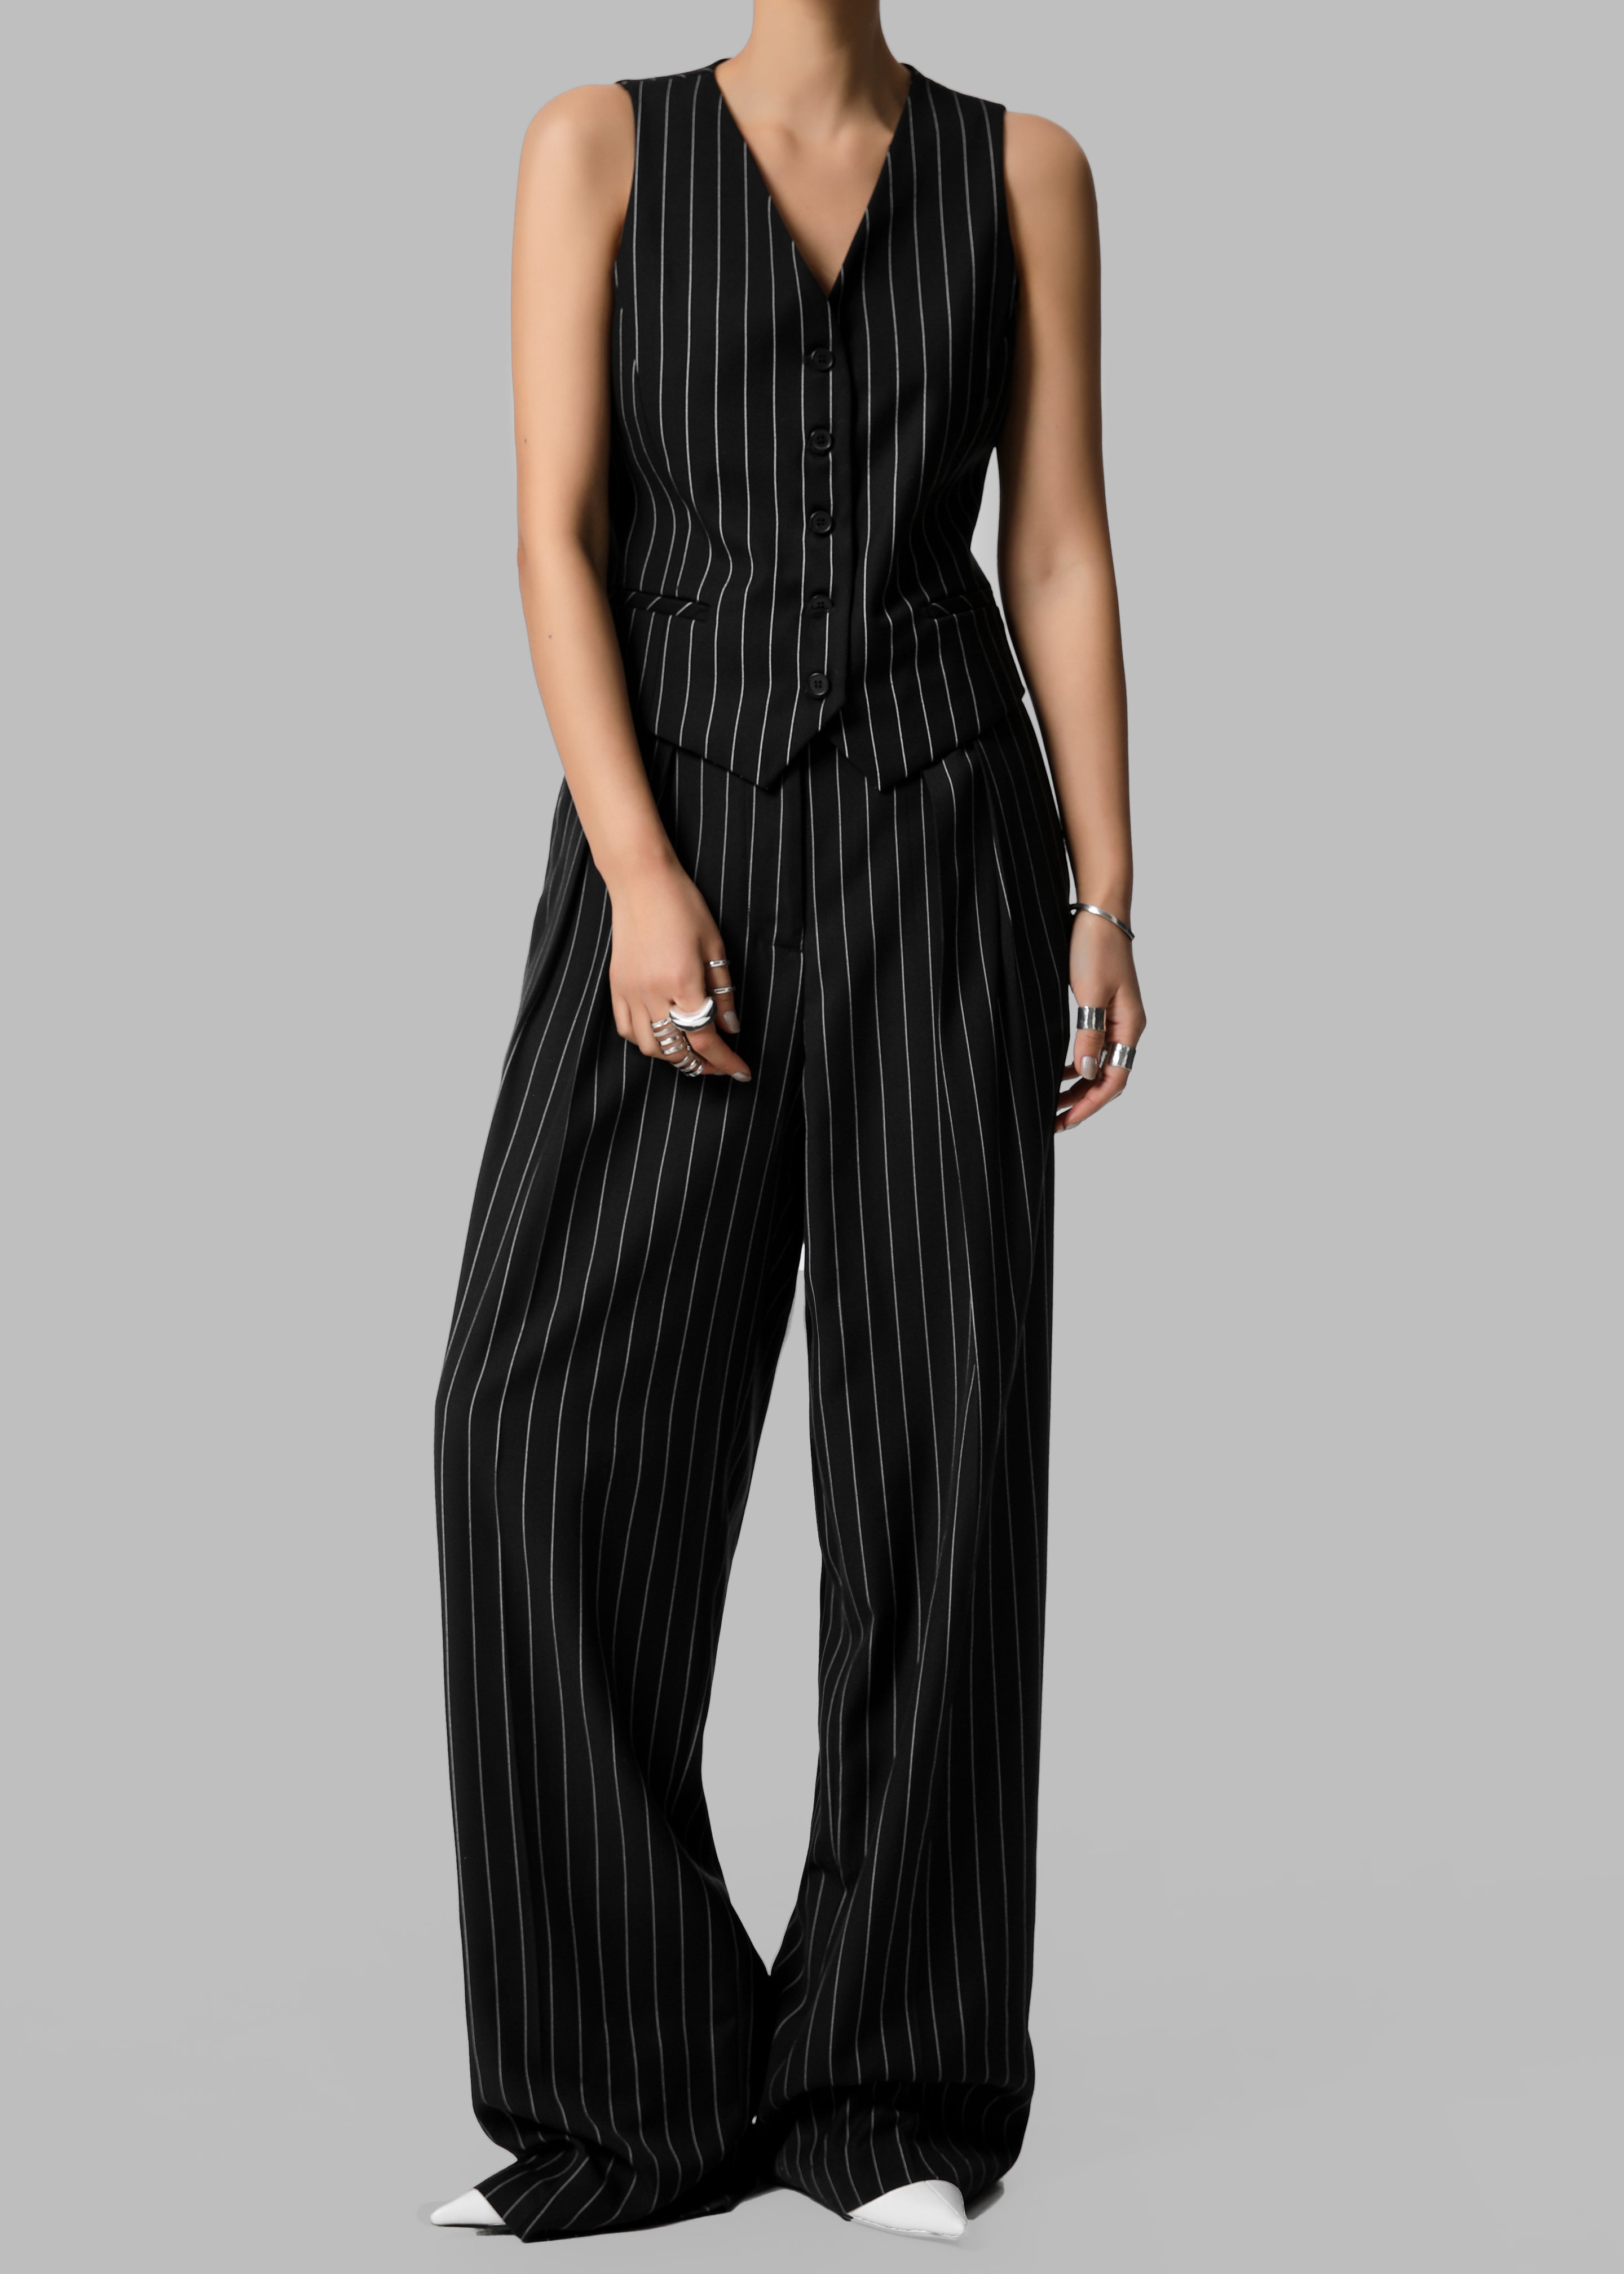 Holland Pleated Trousers - Black/White Pinstripe - 2